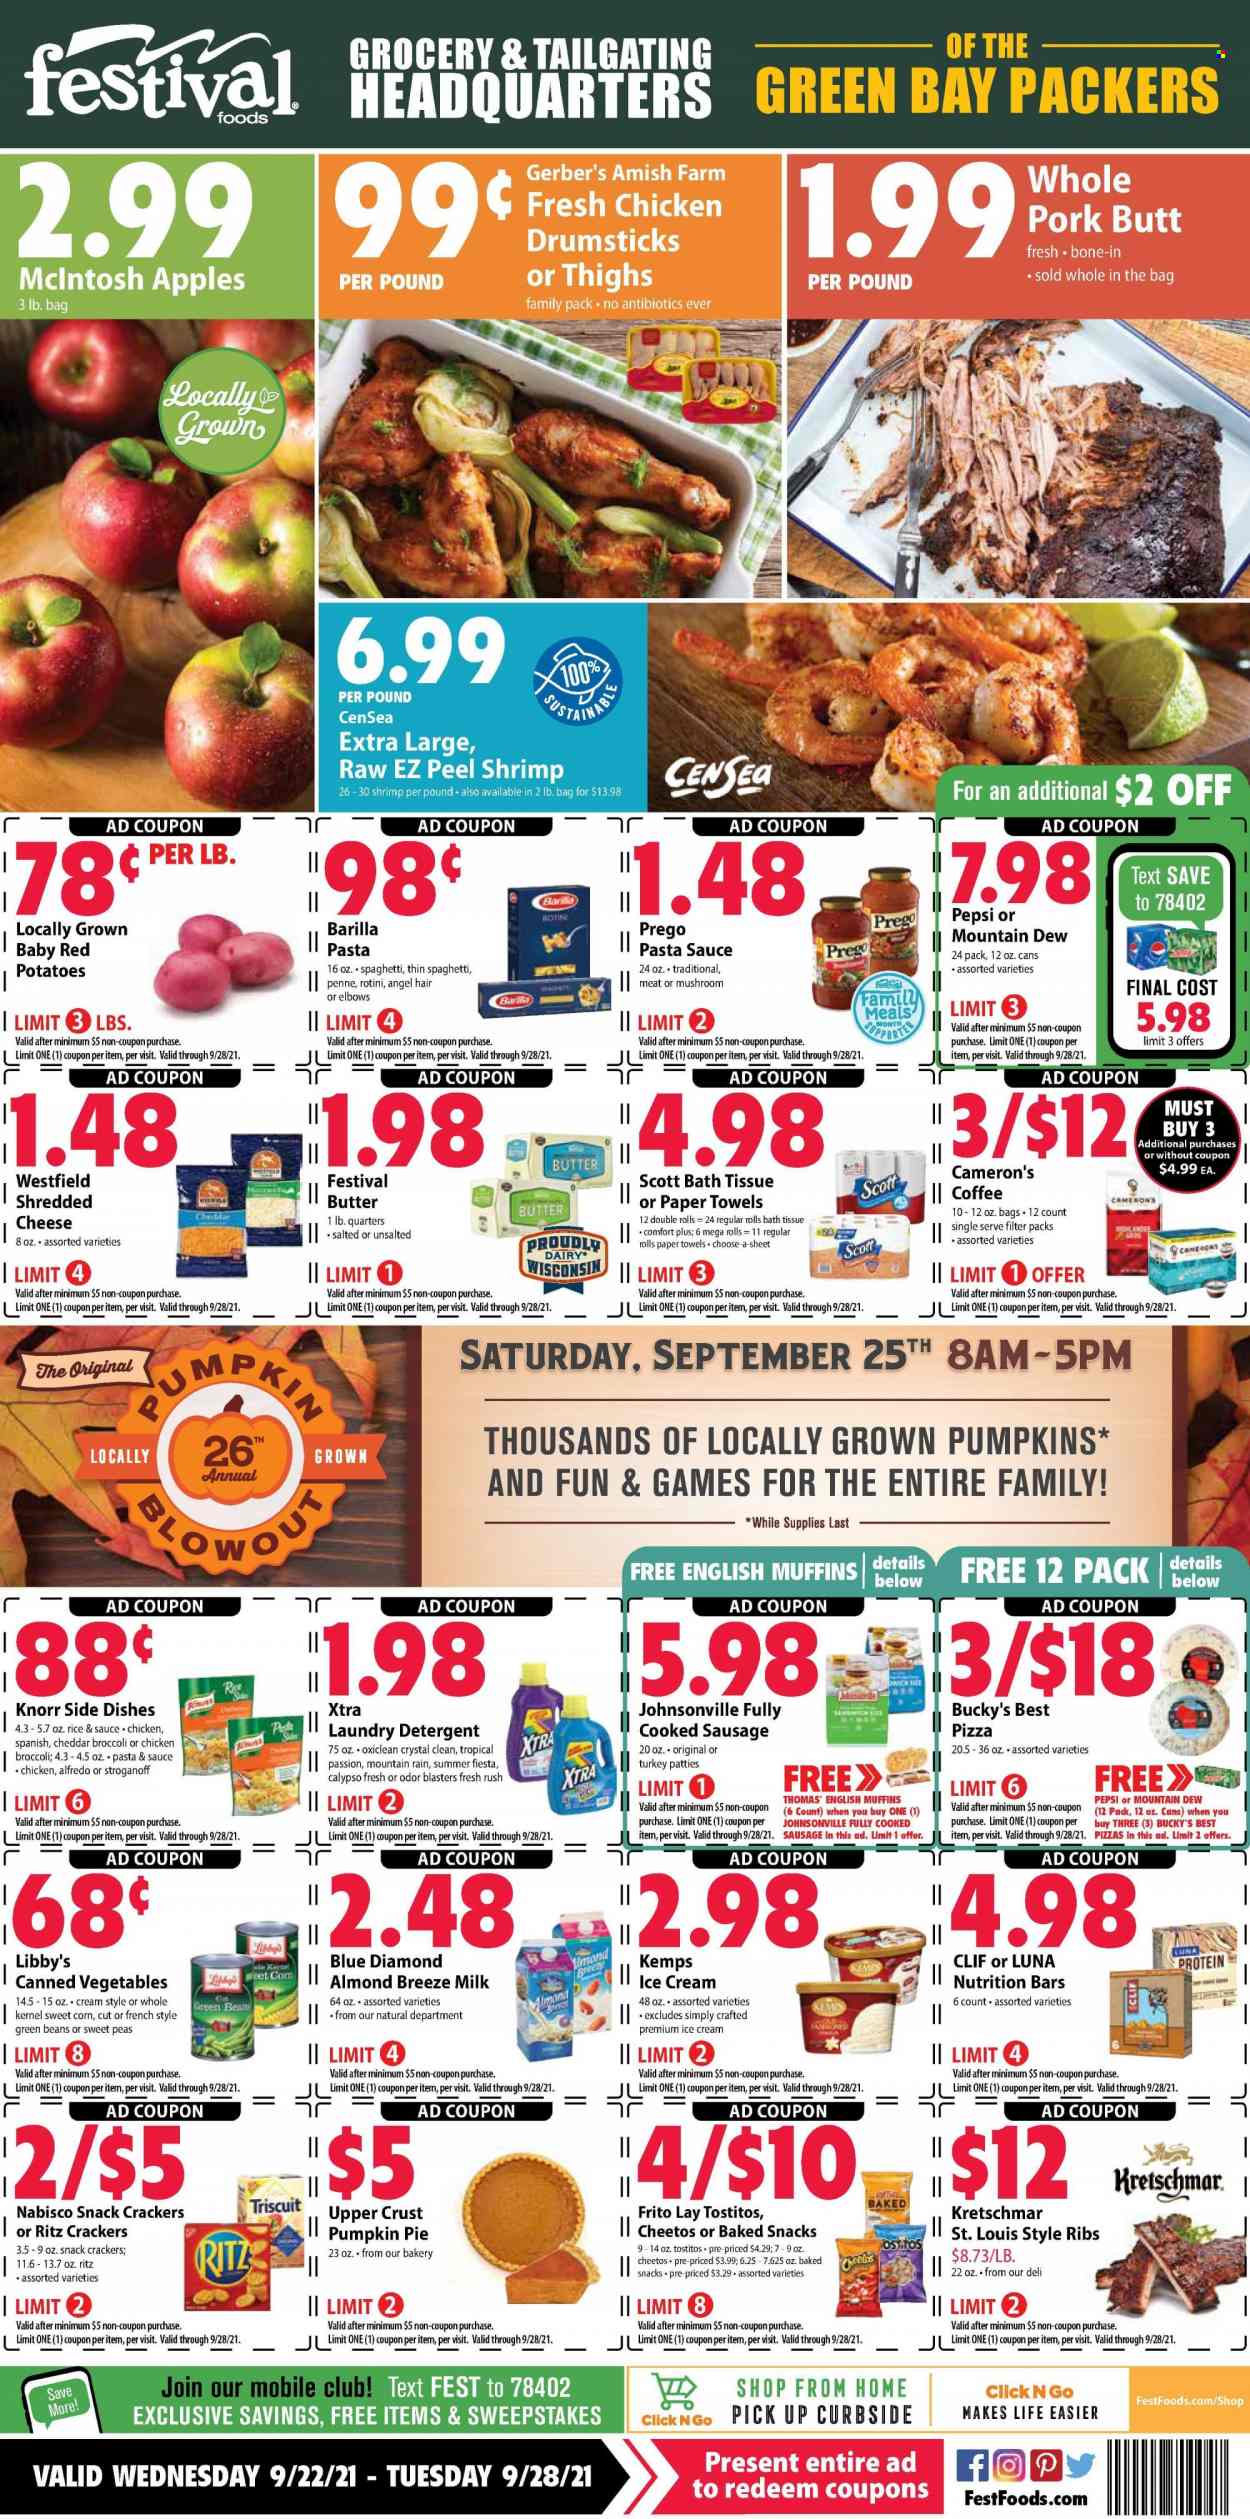 thumbnail - Festival Foods Flyer - 09/22/2021 - 09/28/2021 - Sales products - english muffins, pie, corn, green beans, potatoes, pumpkin, peas, sweet corn, red potatoes, apples, shrimps, spaghetti, pizza, pasta sauce, Knorr, Barilla, Johnsonville, sausage, Kemps, milk, Almond Breeze, butter, ice cream, snack, crackers, RITZ, Cheetos, Tostitos, canned vegetables, nutrition bar, rice, penne, Blue Diamond, Mountain Dew, Pepsi, coffee, chicken drumsticks, bath tissue, Scott, kitchen towels, paper towels, detergent, OxiClean, laundry detergent, XTRA. Page 1.